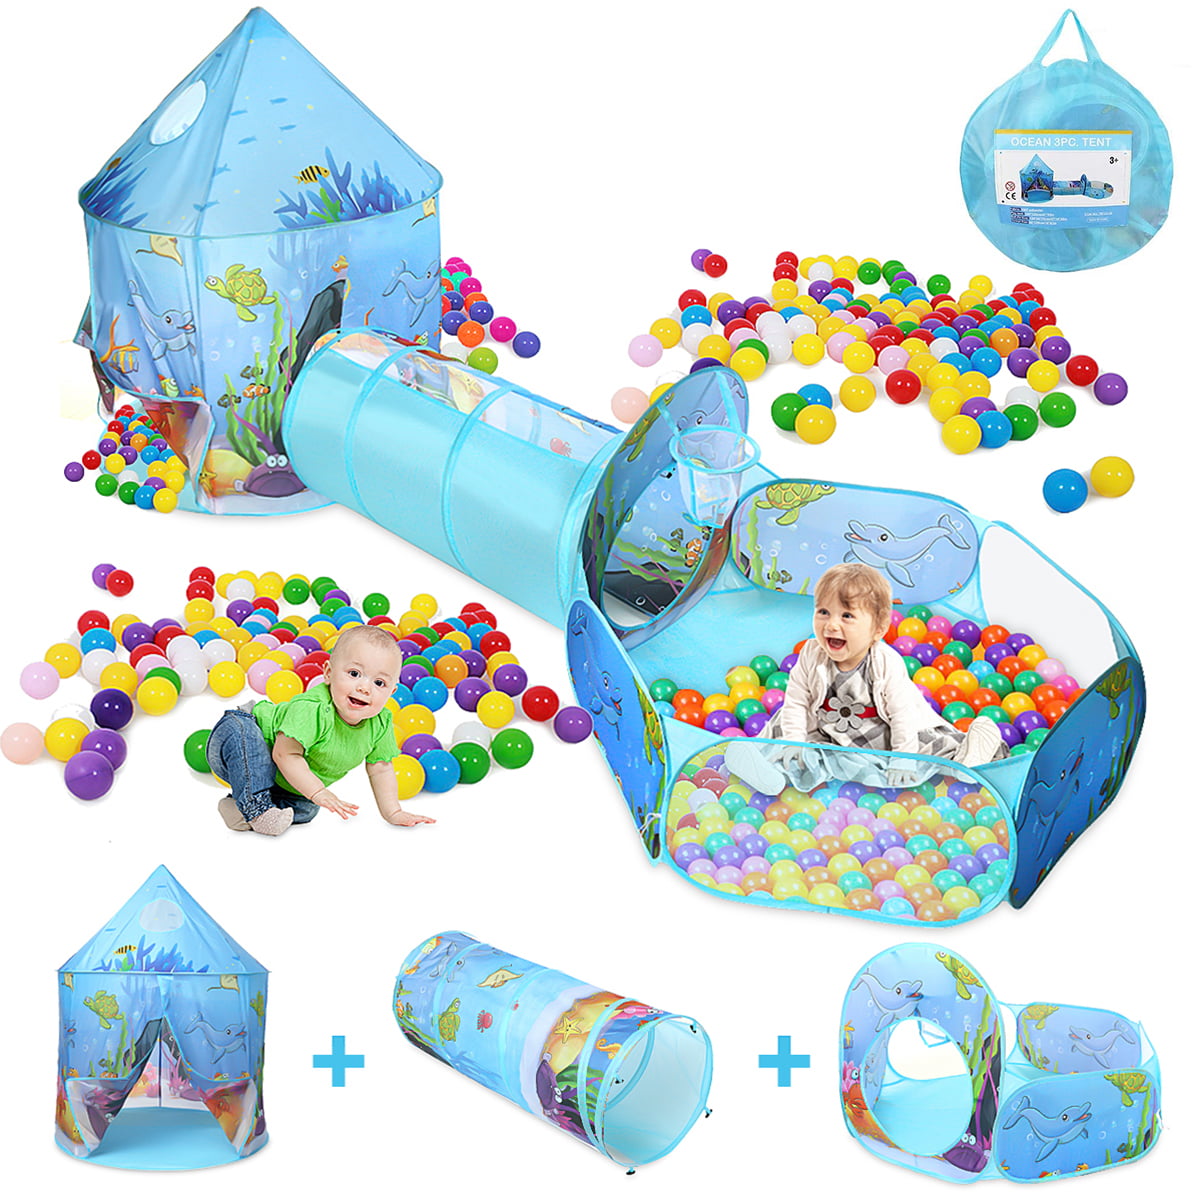 Foldable Kids Crawl Through Play Tunnel Toy Pop up Tunnel for Kids Toddlers 1 pc 